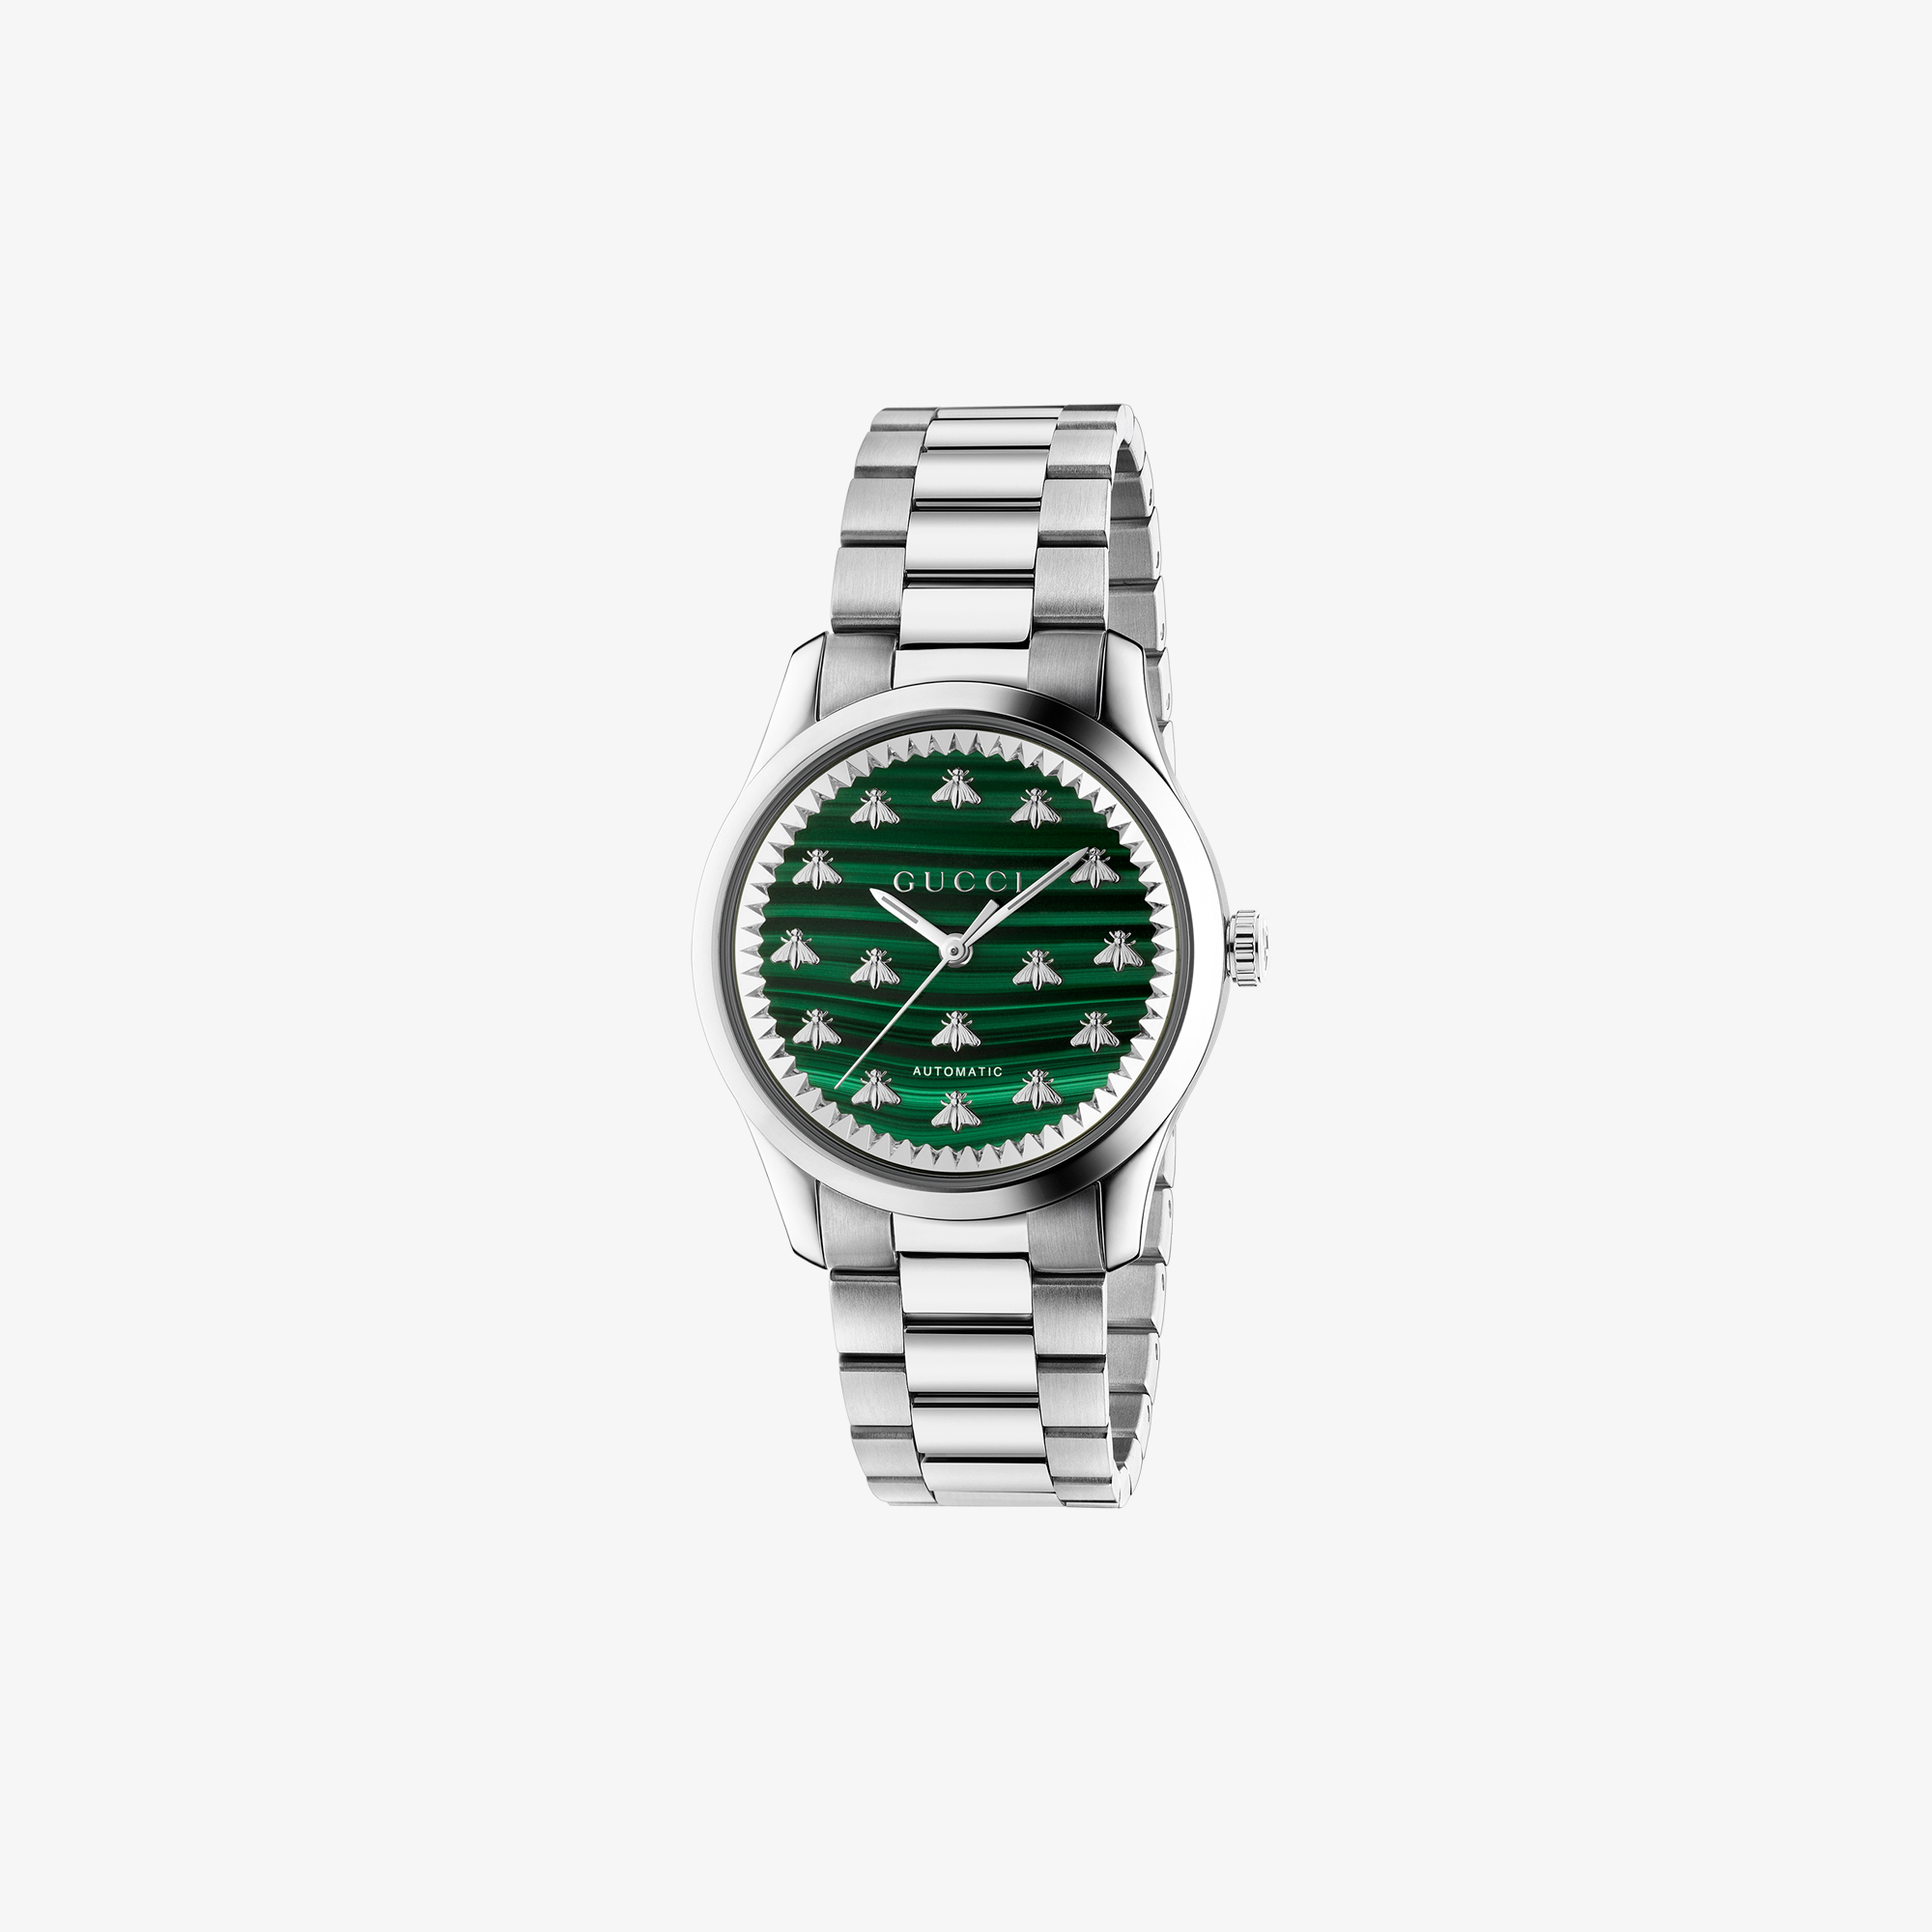 GUCCI G-TIMELESS 38MM AUTOMATIC WATCH WITH GREEN DIAL